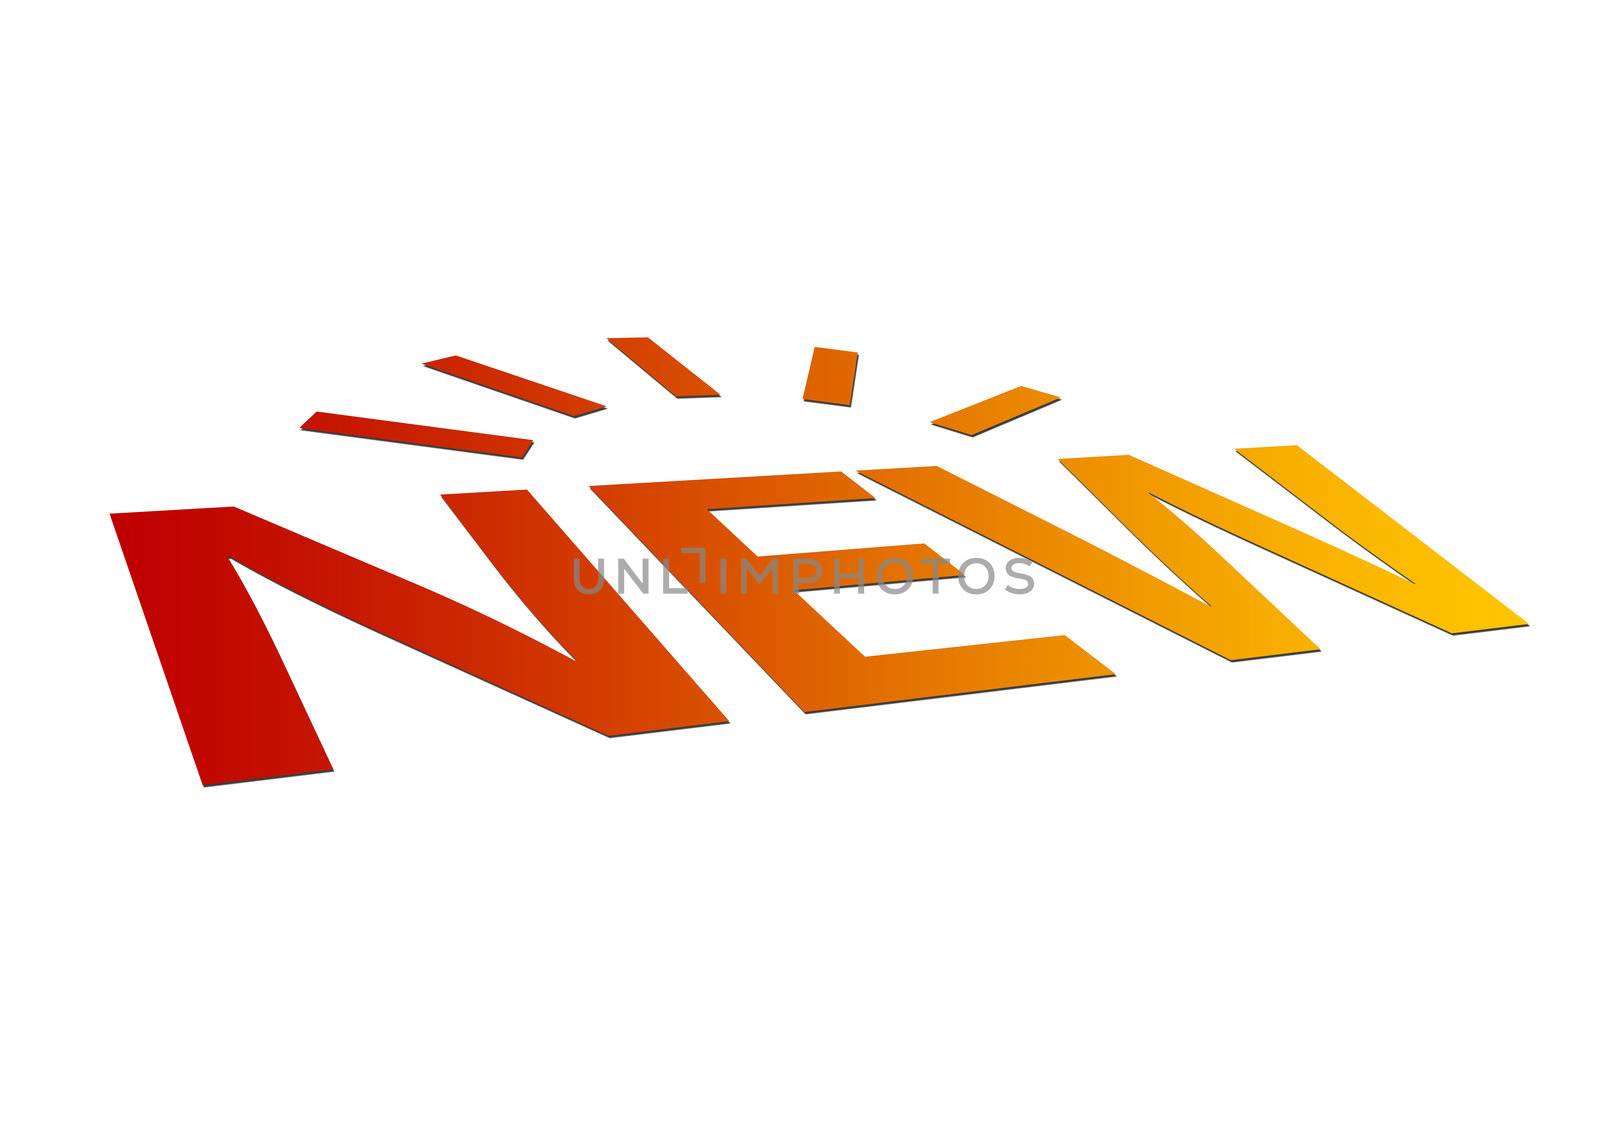 High resolution perspective graphic of the word NEW